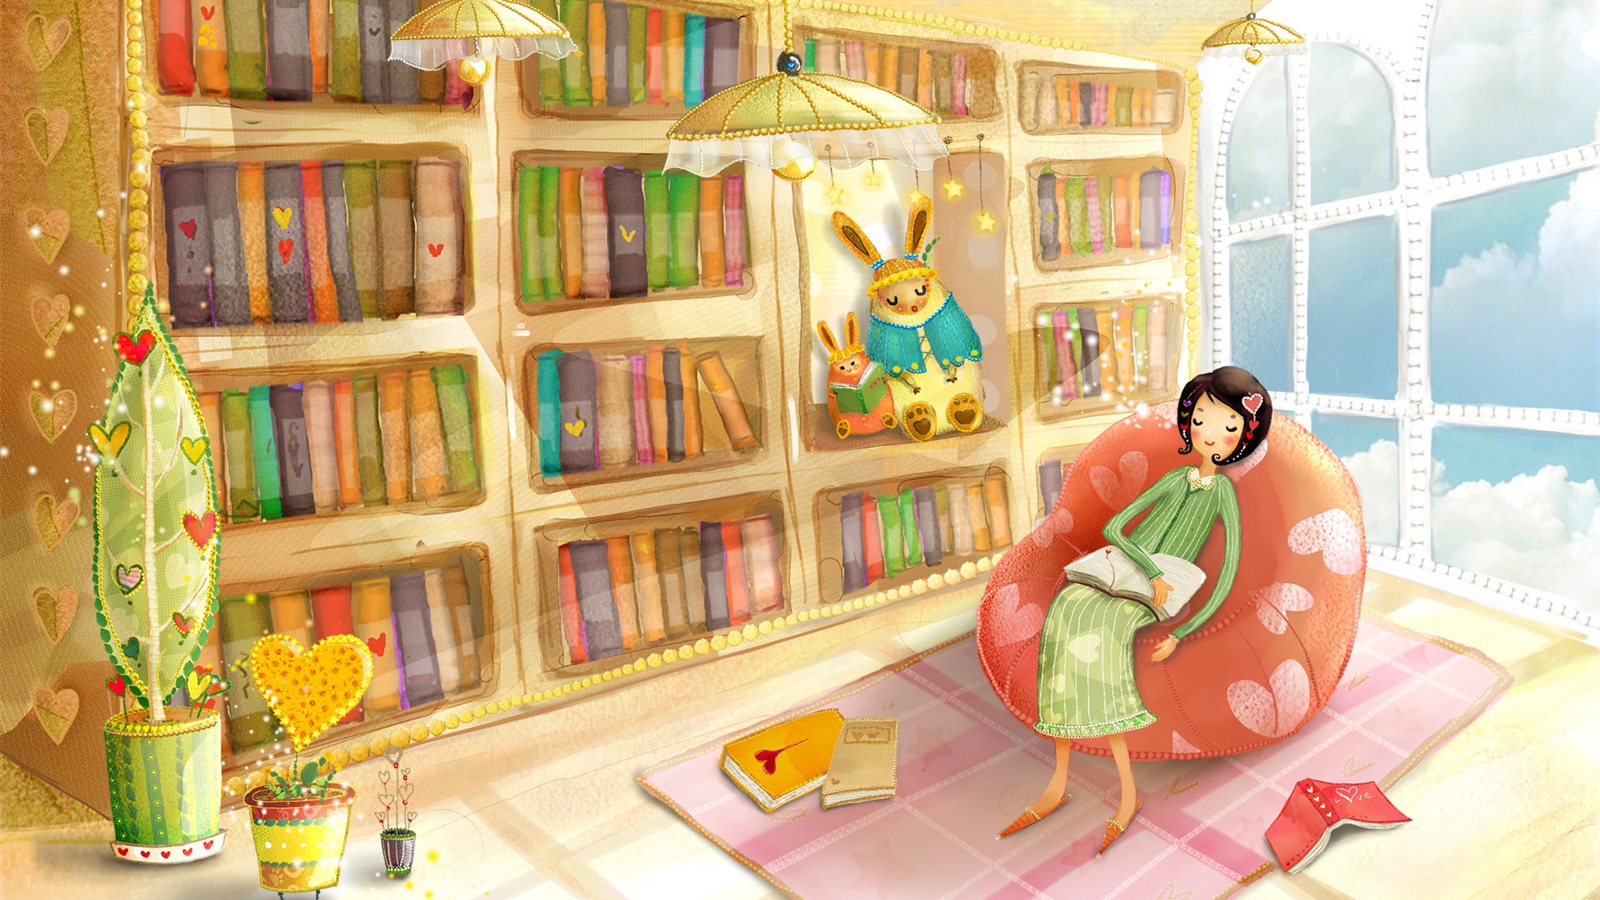 Wallpaper rest of the girls in the study x hd picture image